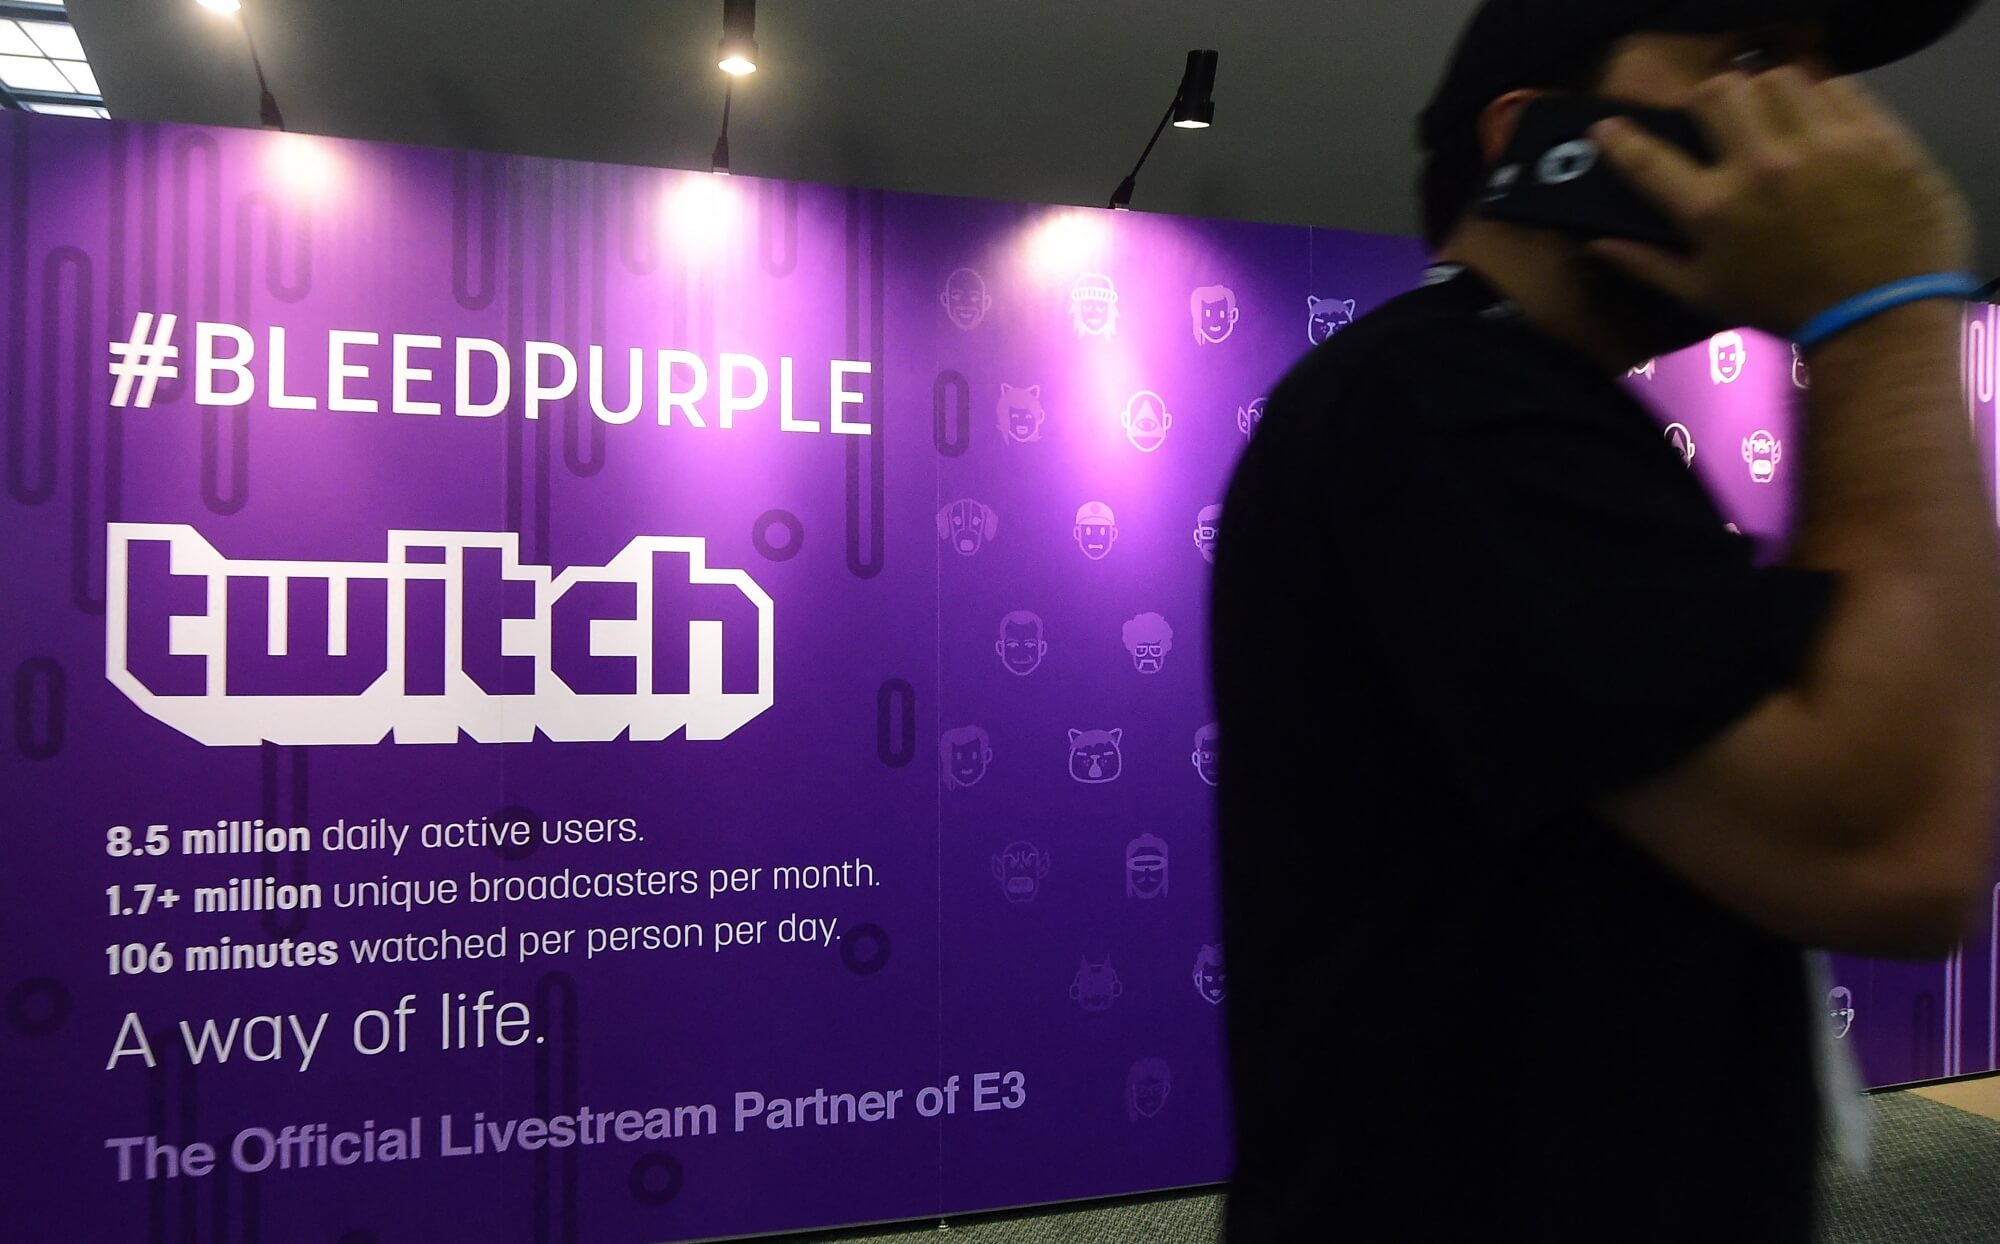 Can university students earn money through Twitch?